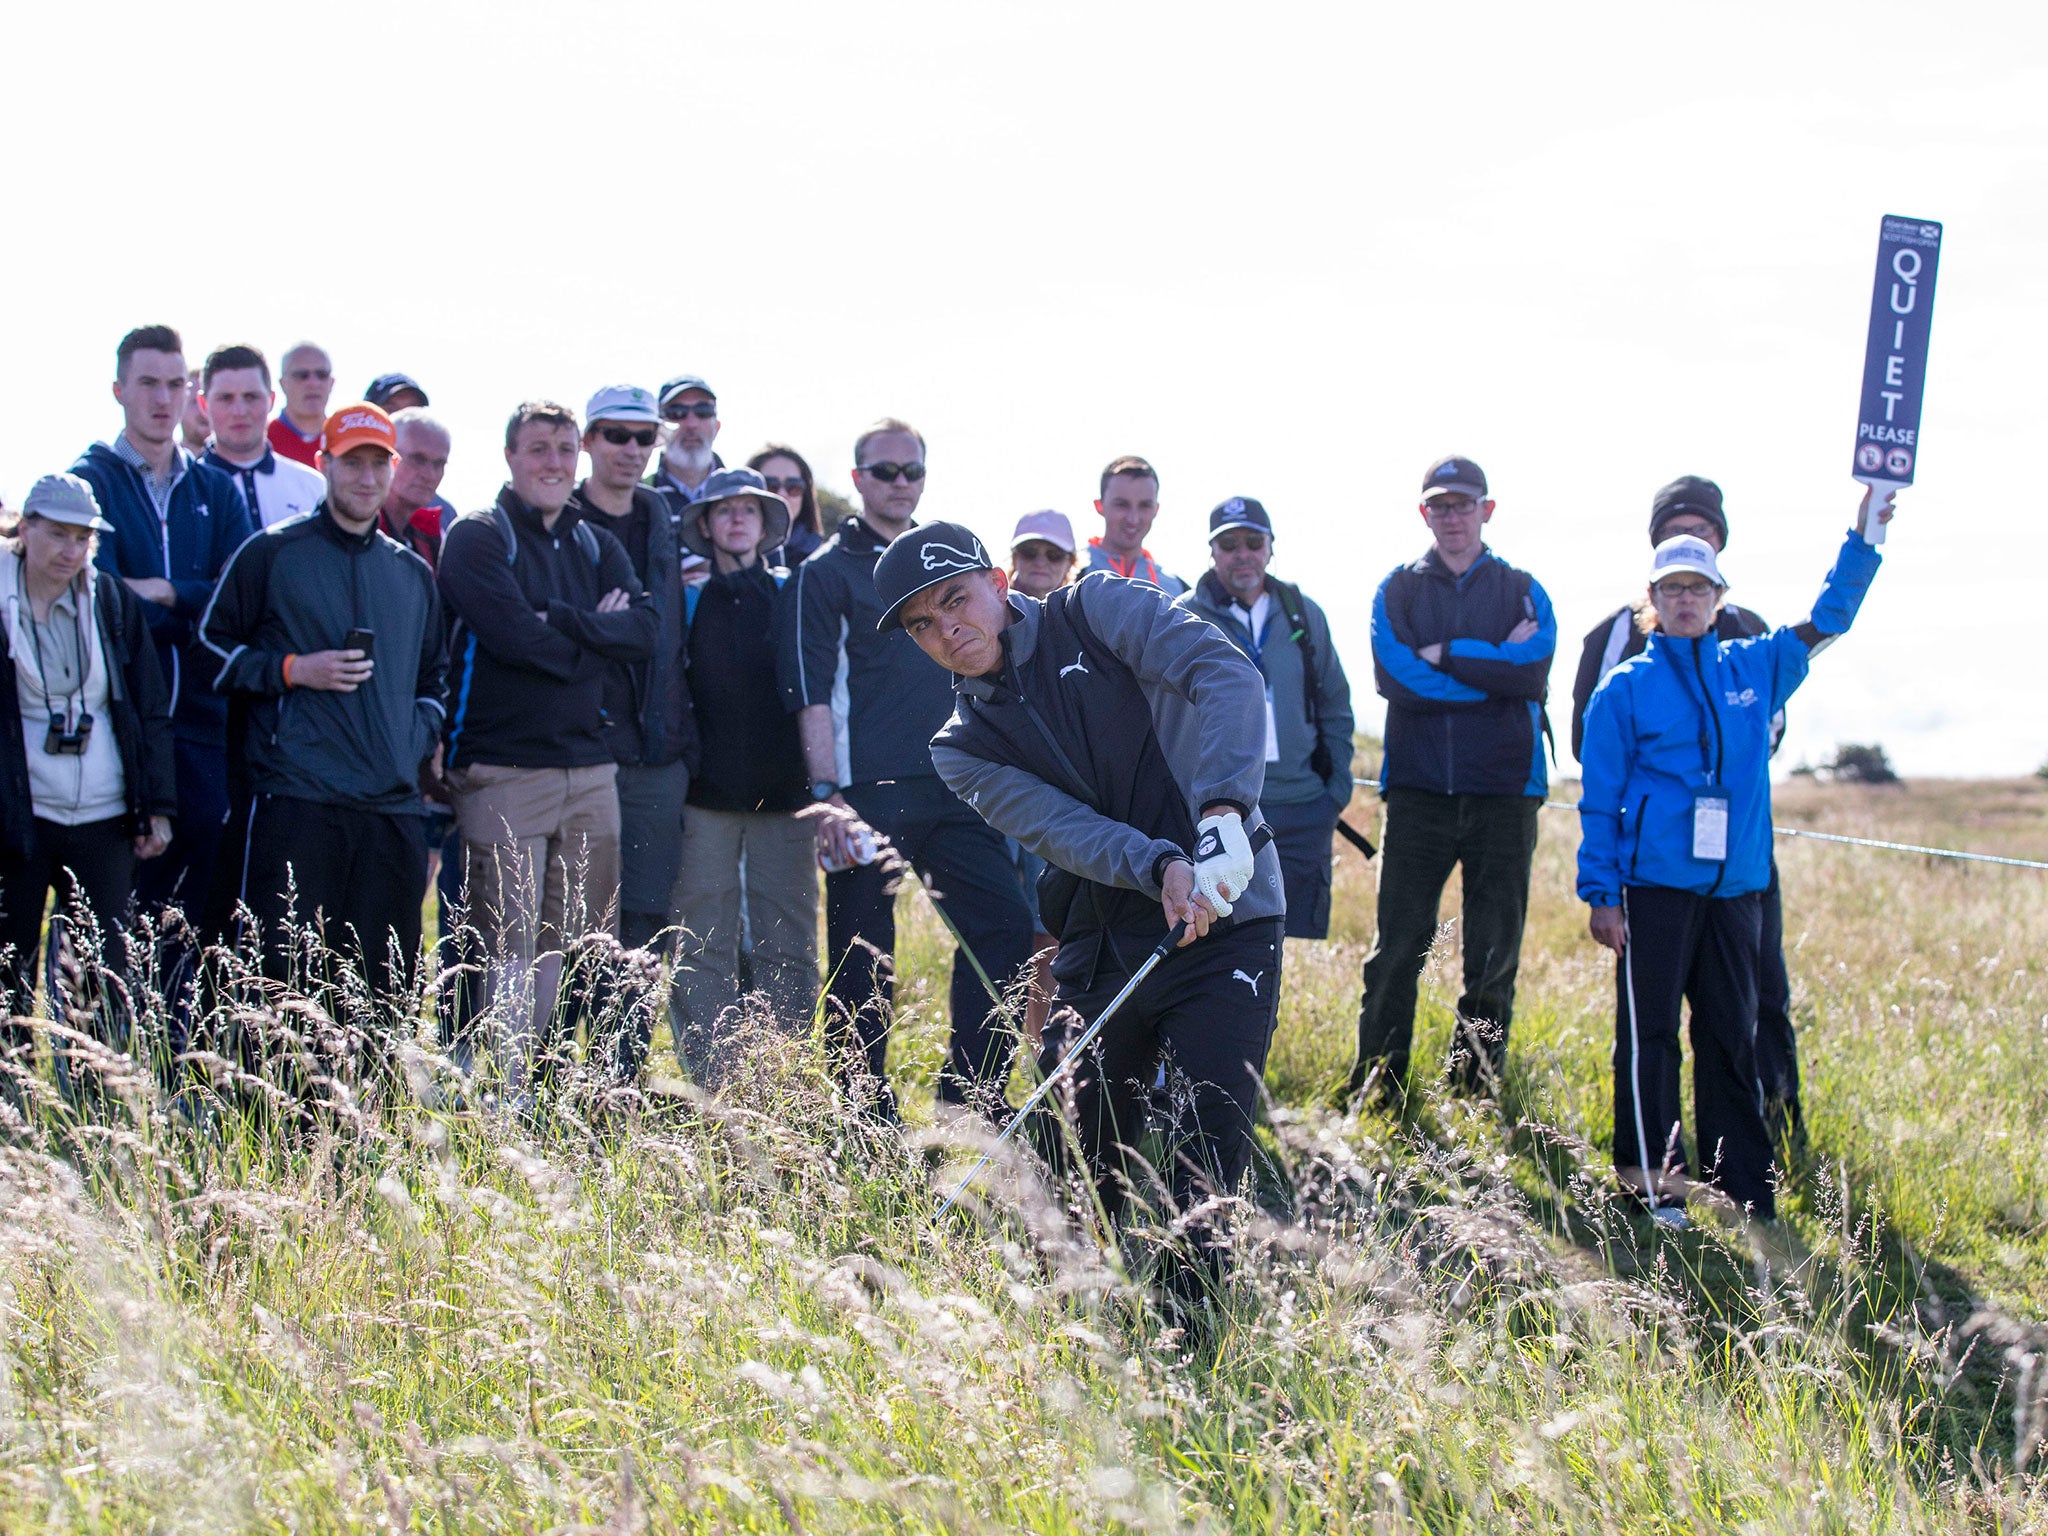 Rickie Fowler, of the United States, chips out of the rough during his first round at the Scottish Open at Gullane